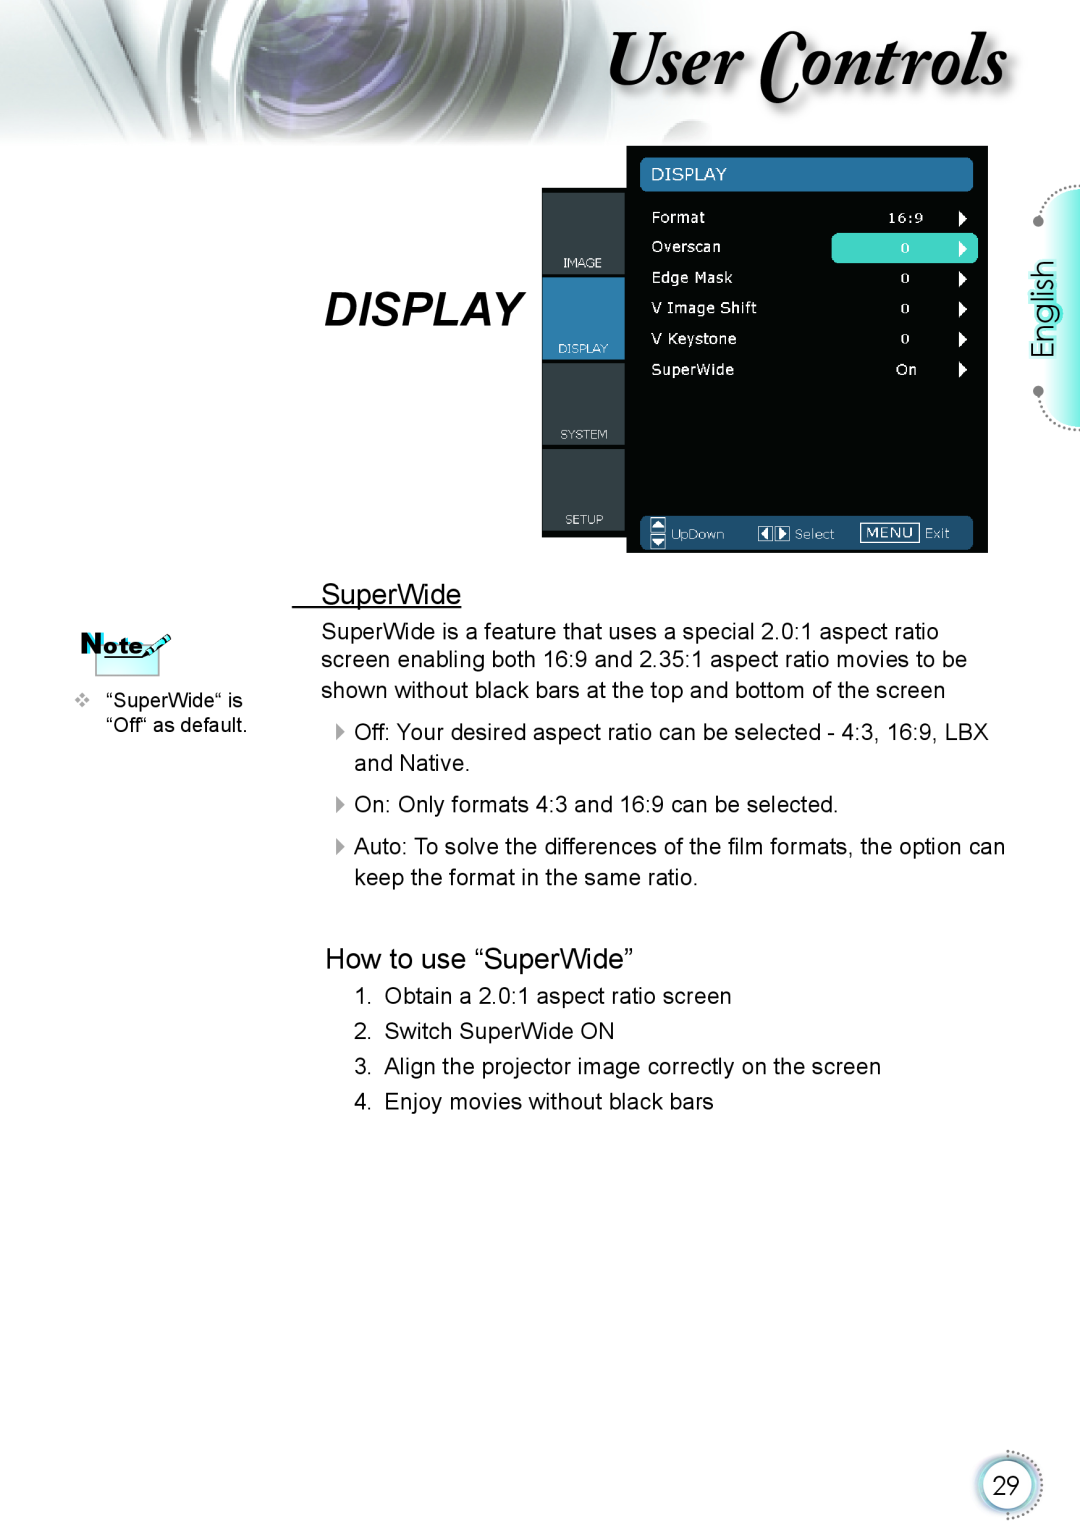 Optoma Technology HD20 manual How to use “SuperWide”, ser ontrols, Display, English 